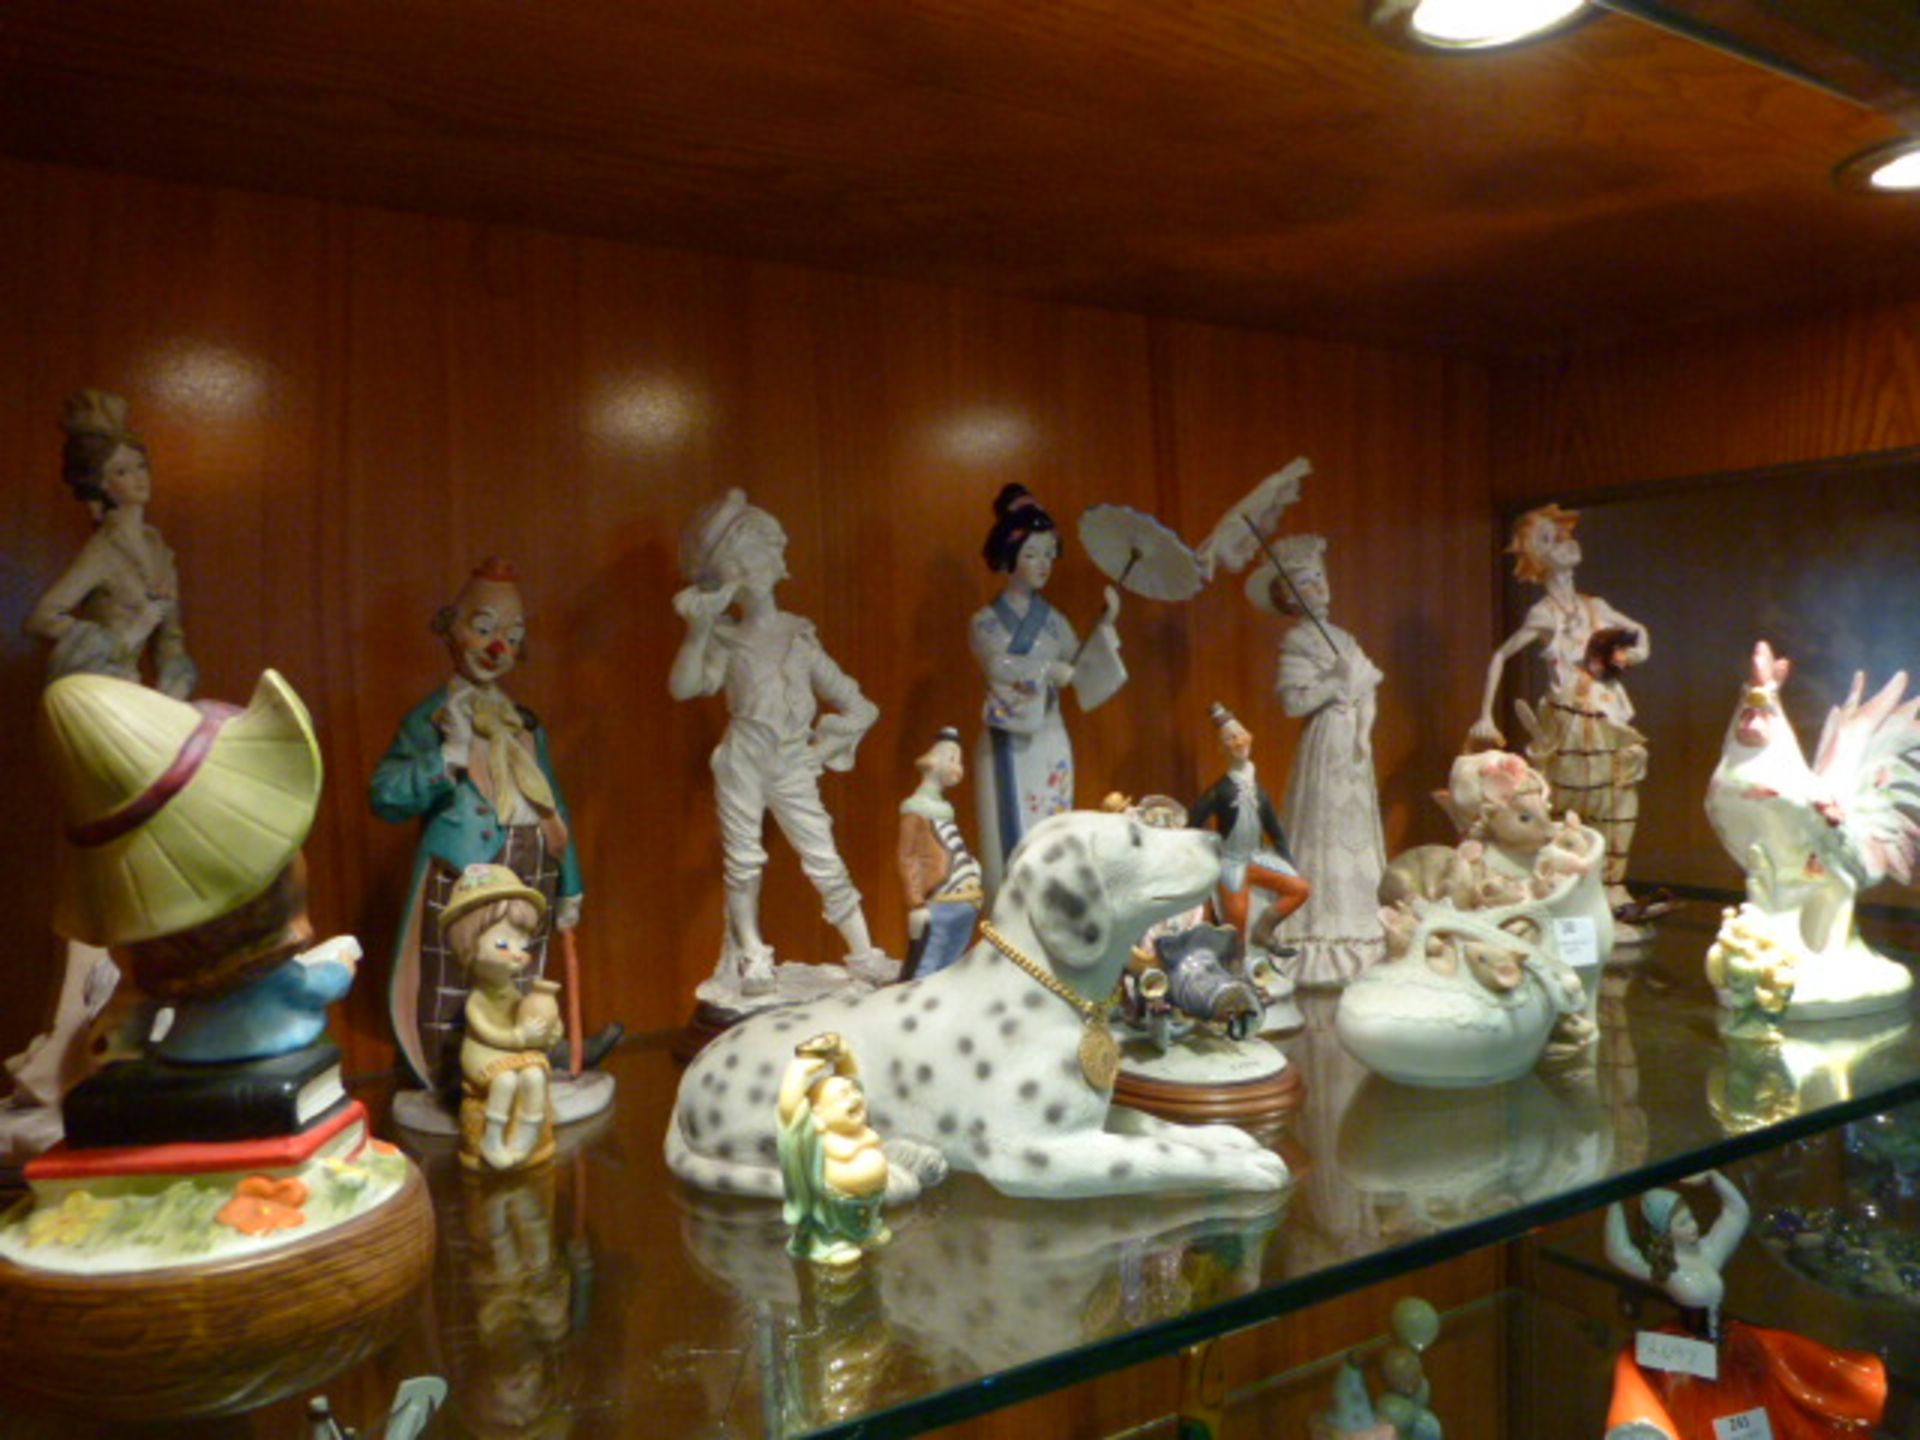 Collection of Pottery Figurines; Japanese Girl, Dog, Clown, Chicken, etc.